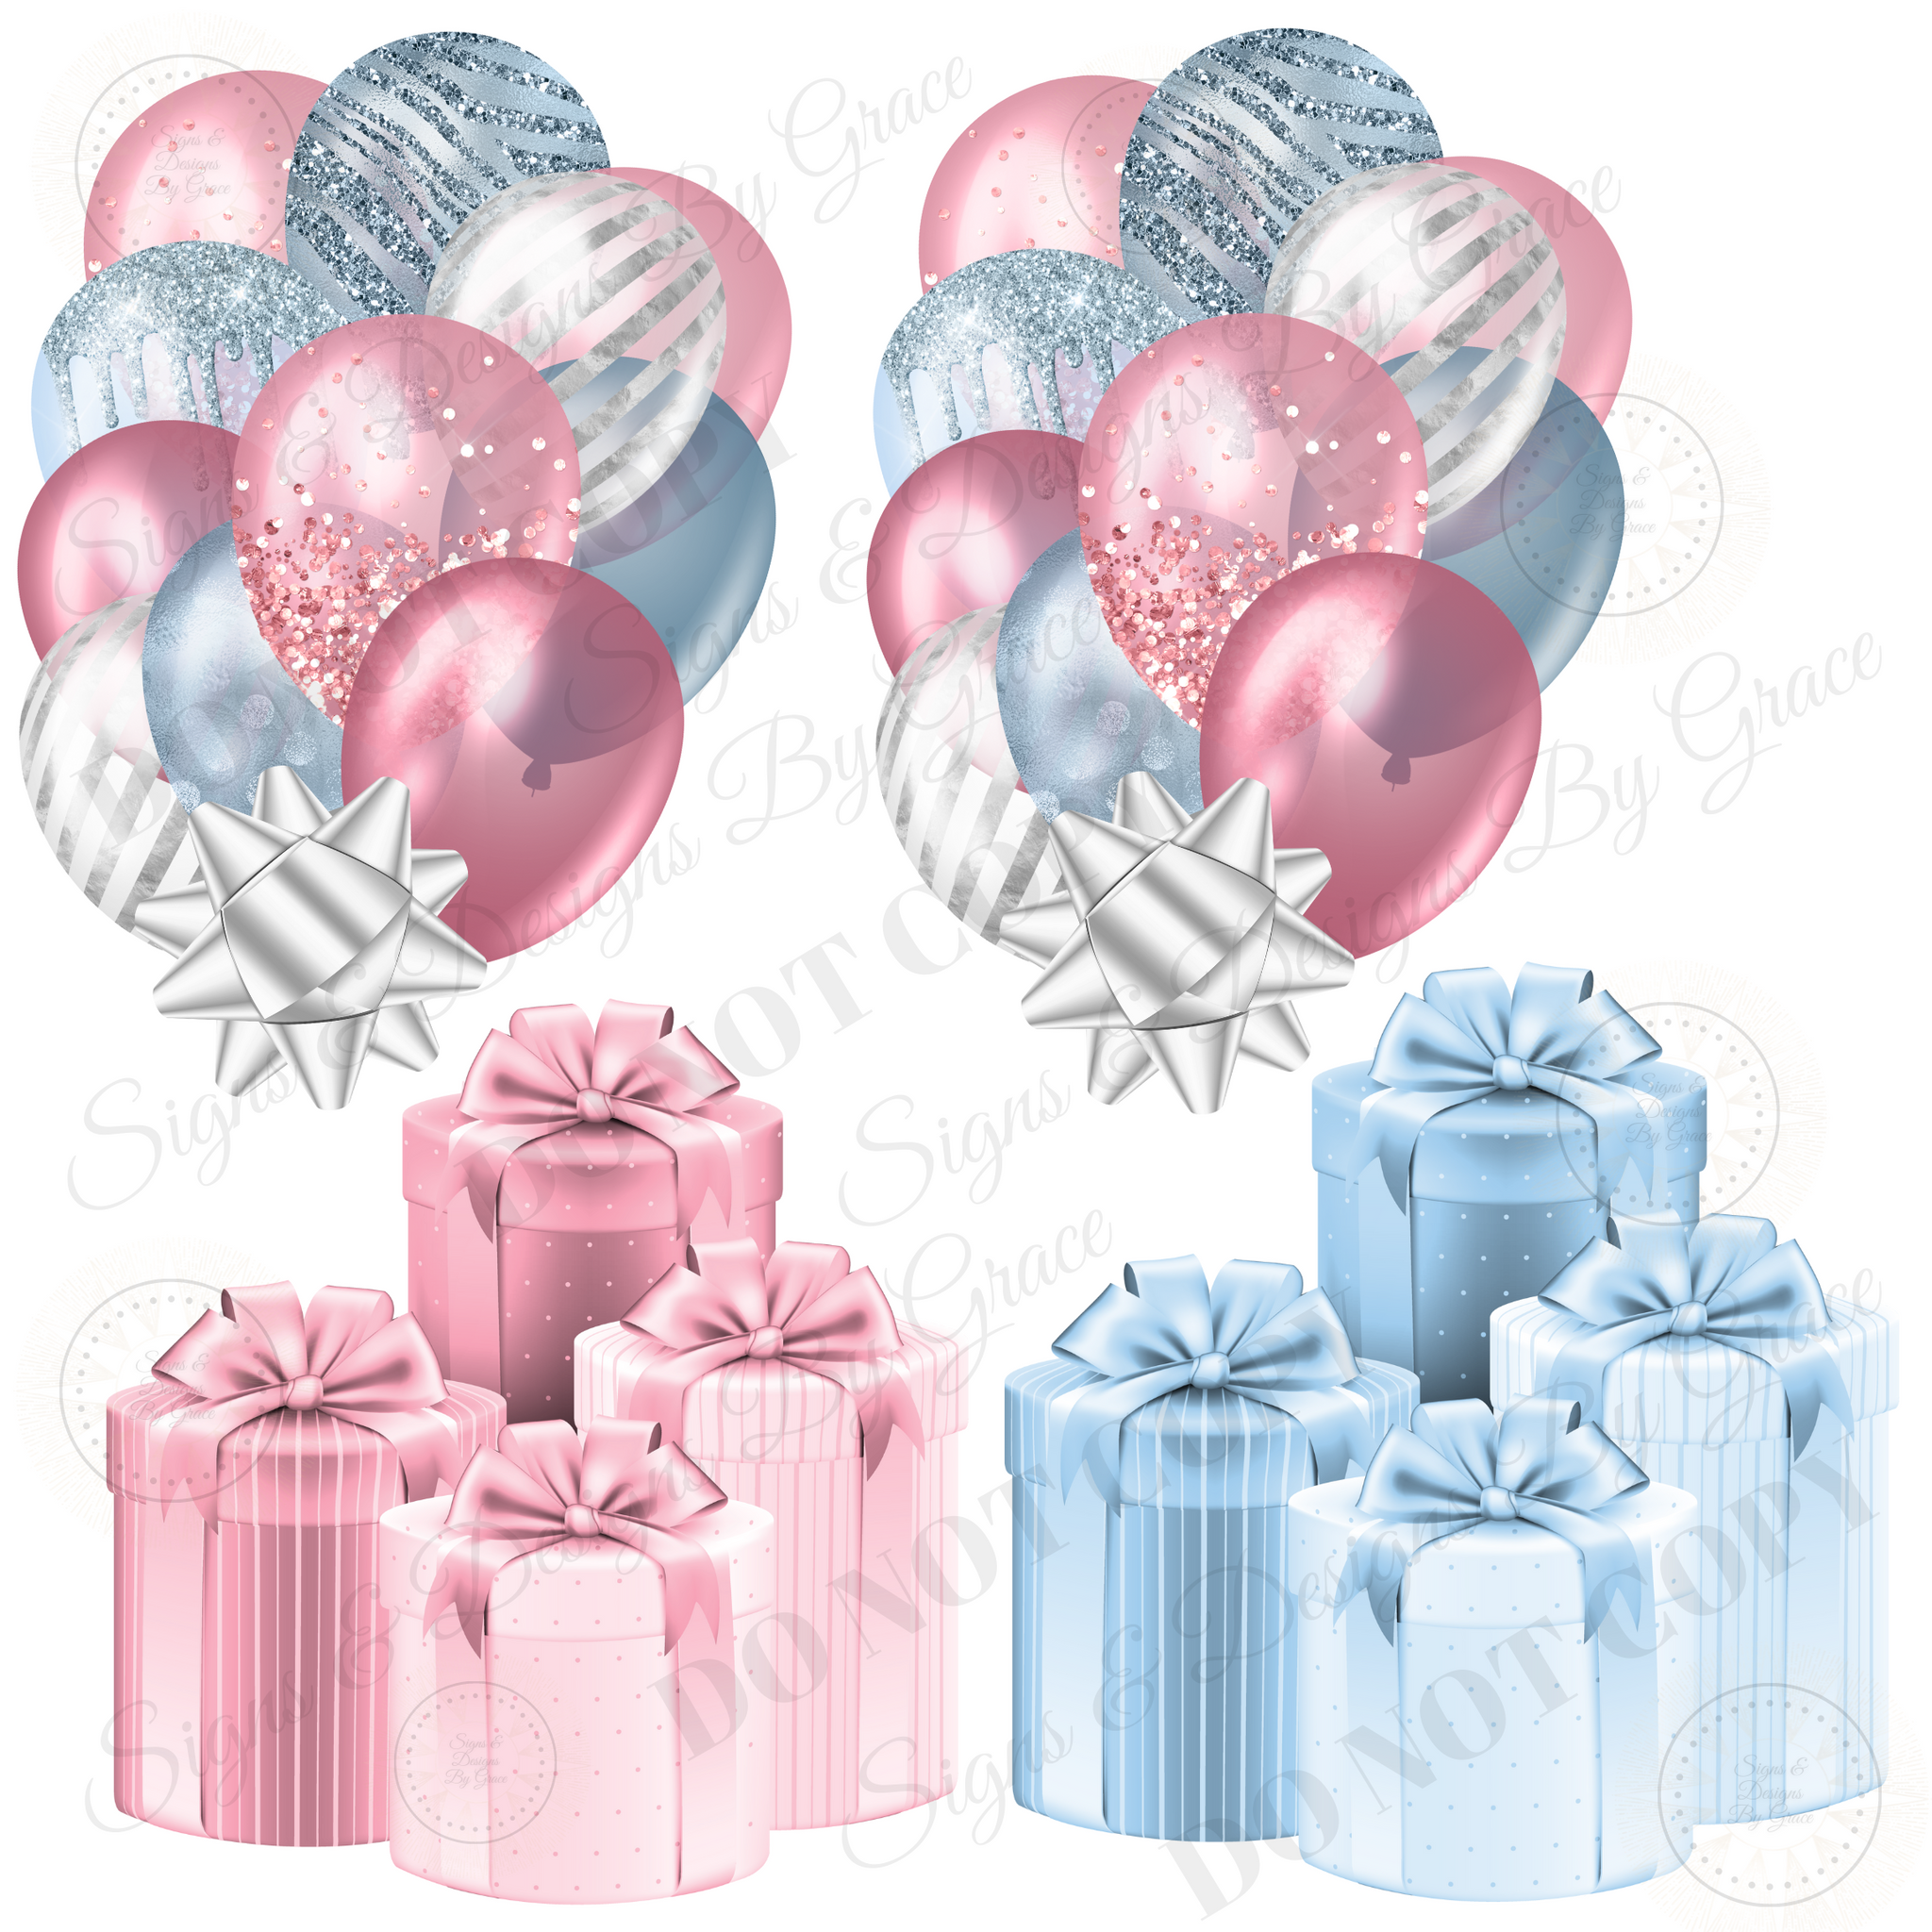 Baby Blue and Pink Balloon Bundles and Gift Boxes